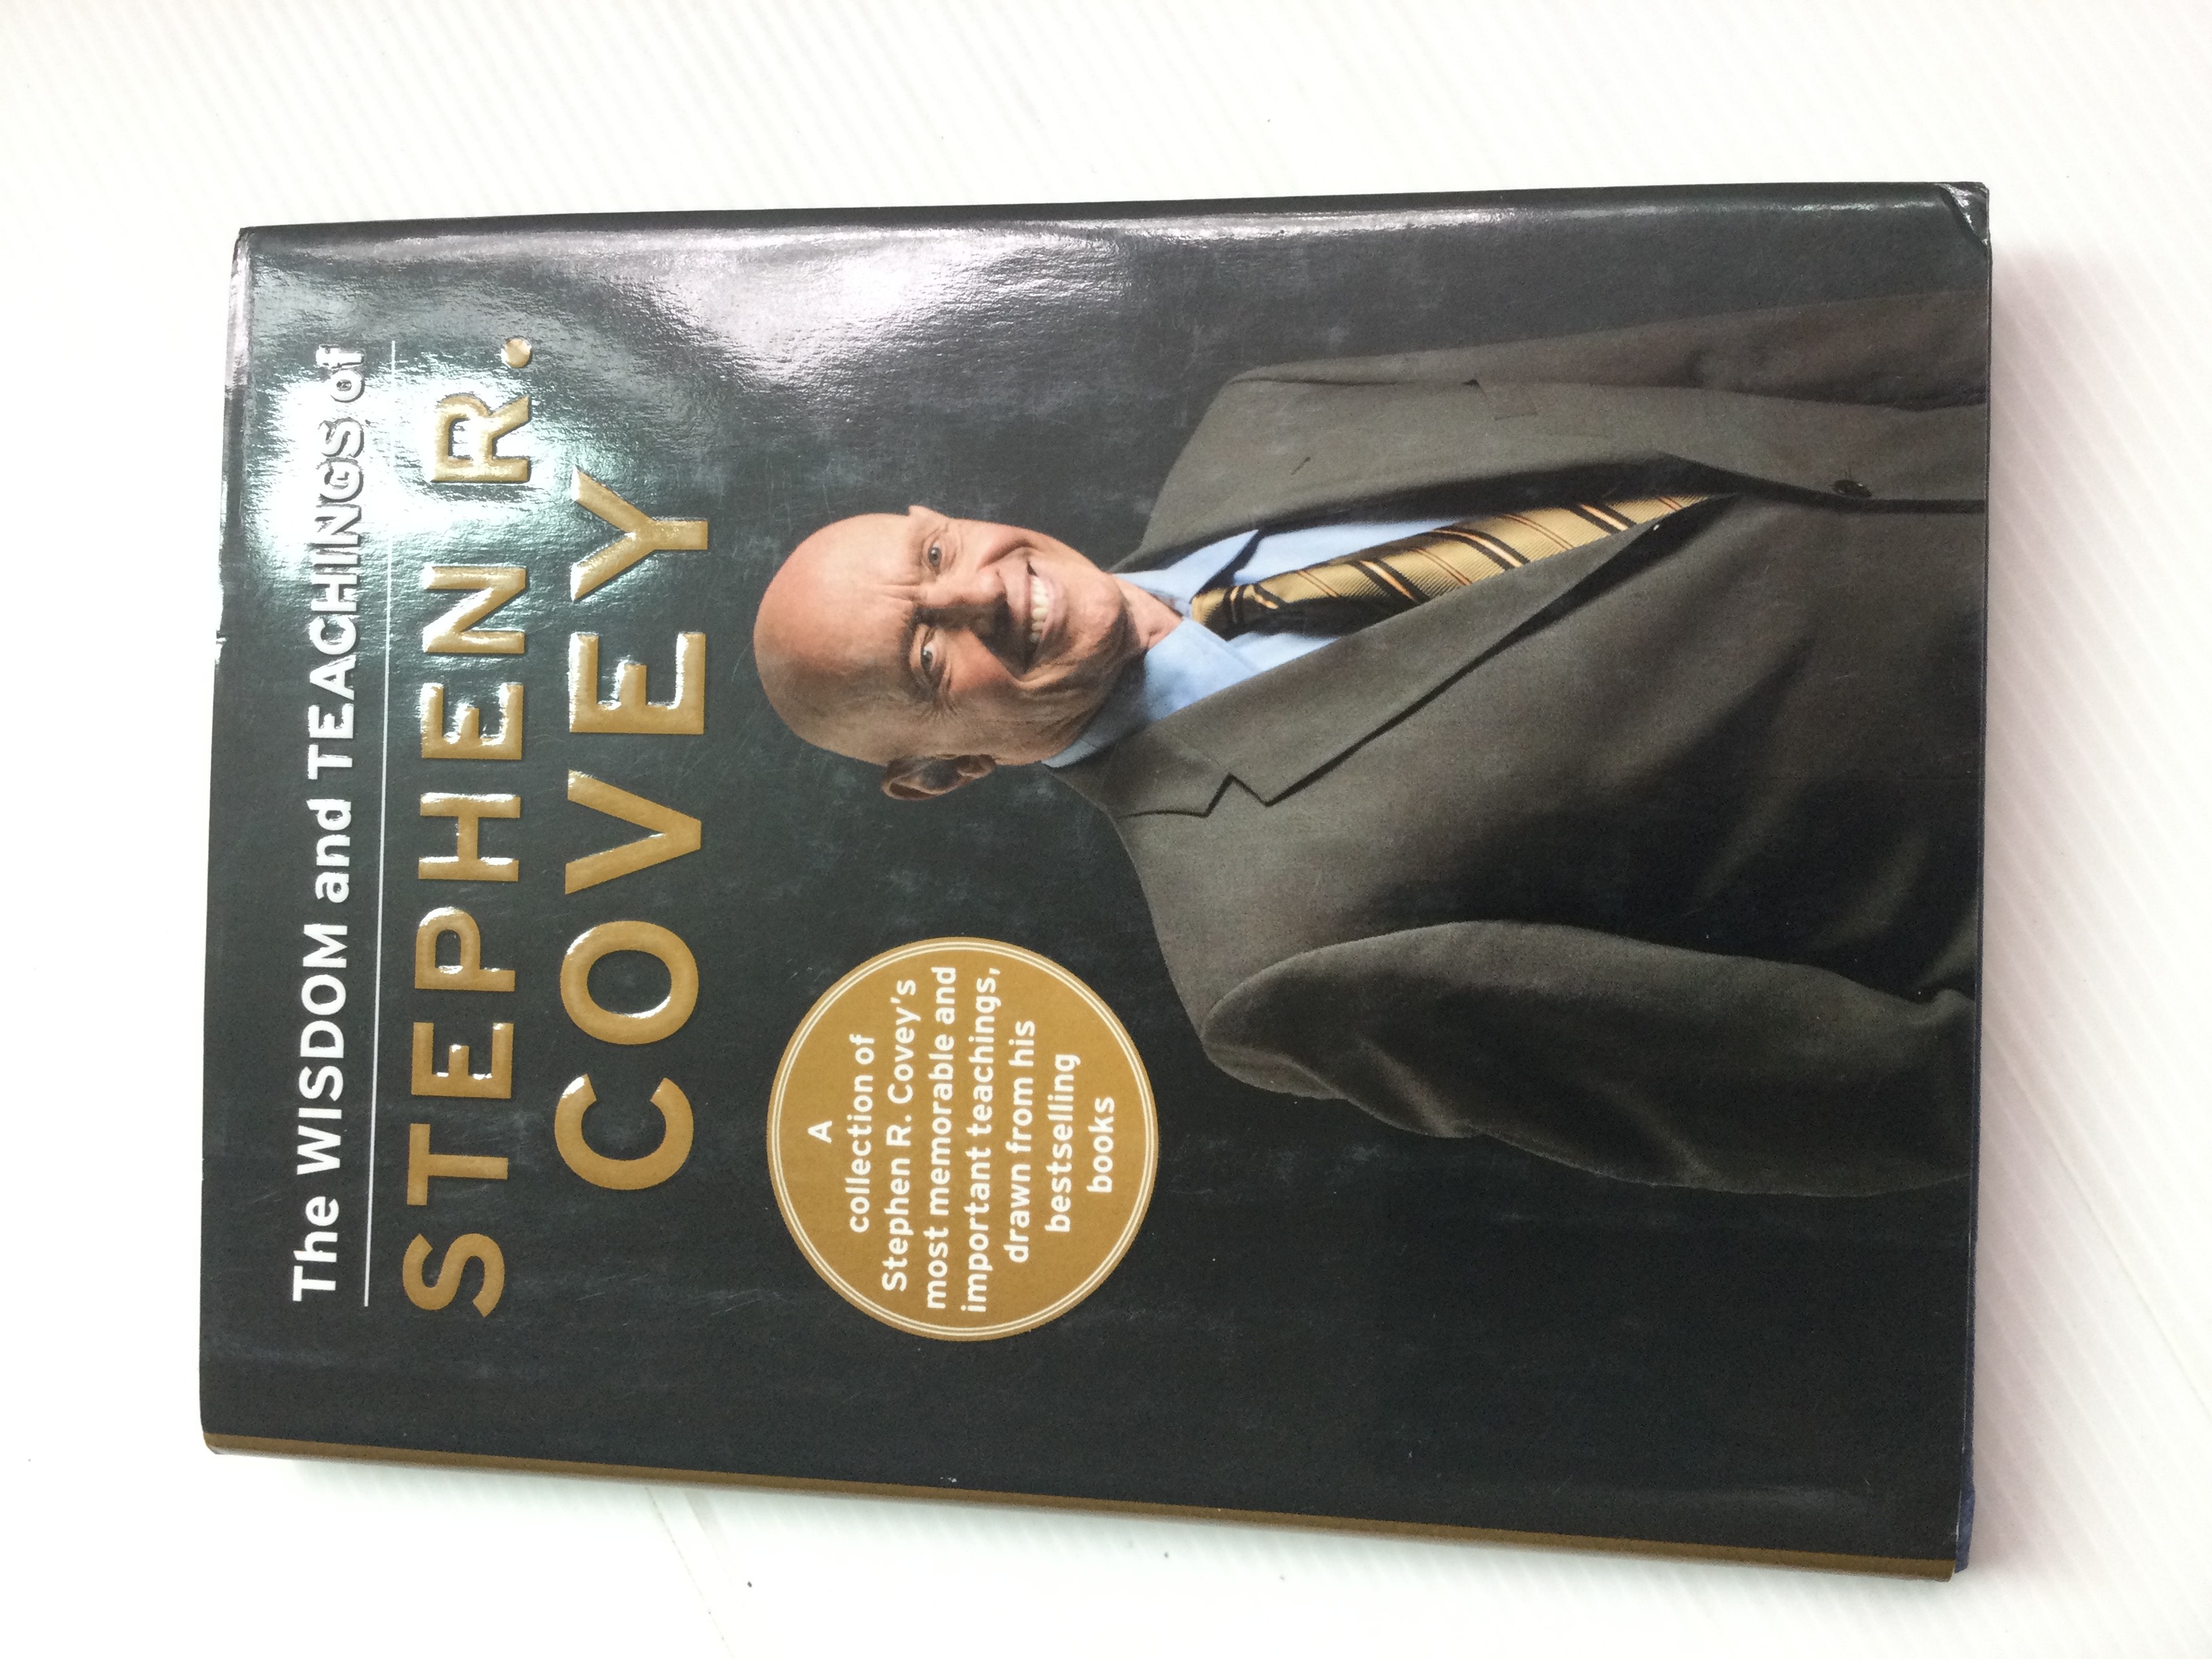 The Wisdom and Teachings of Stephen R Covey